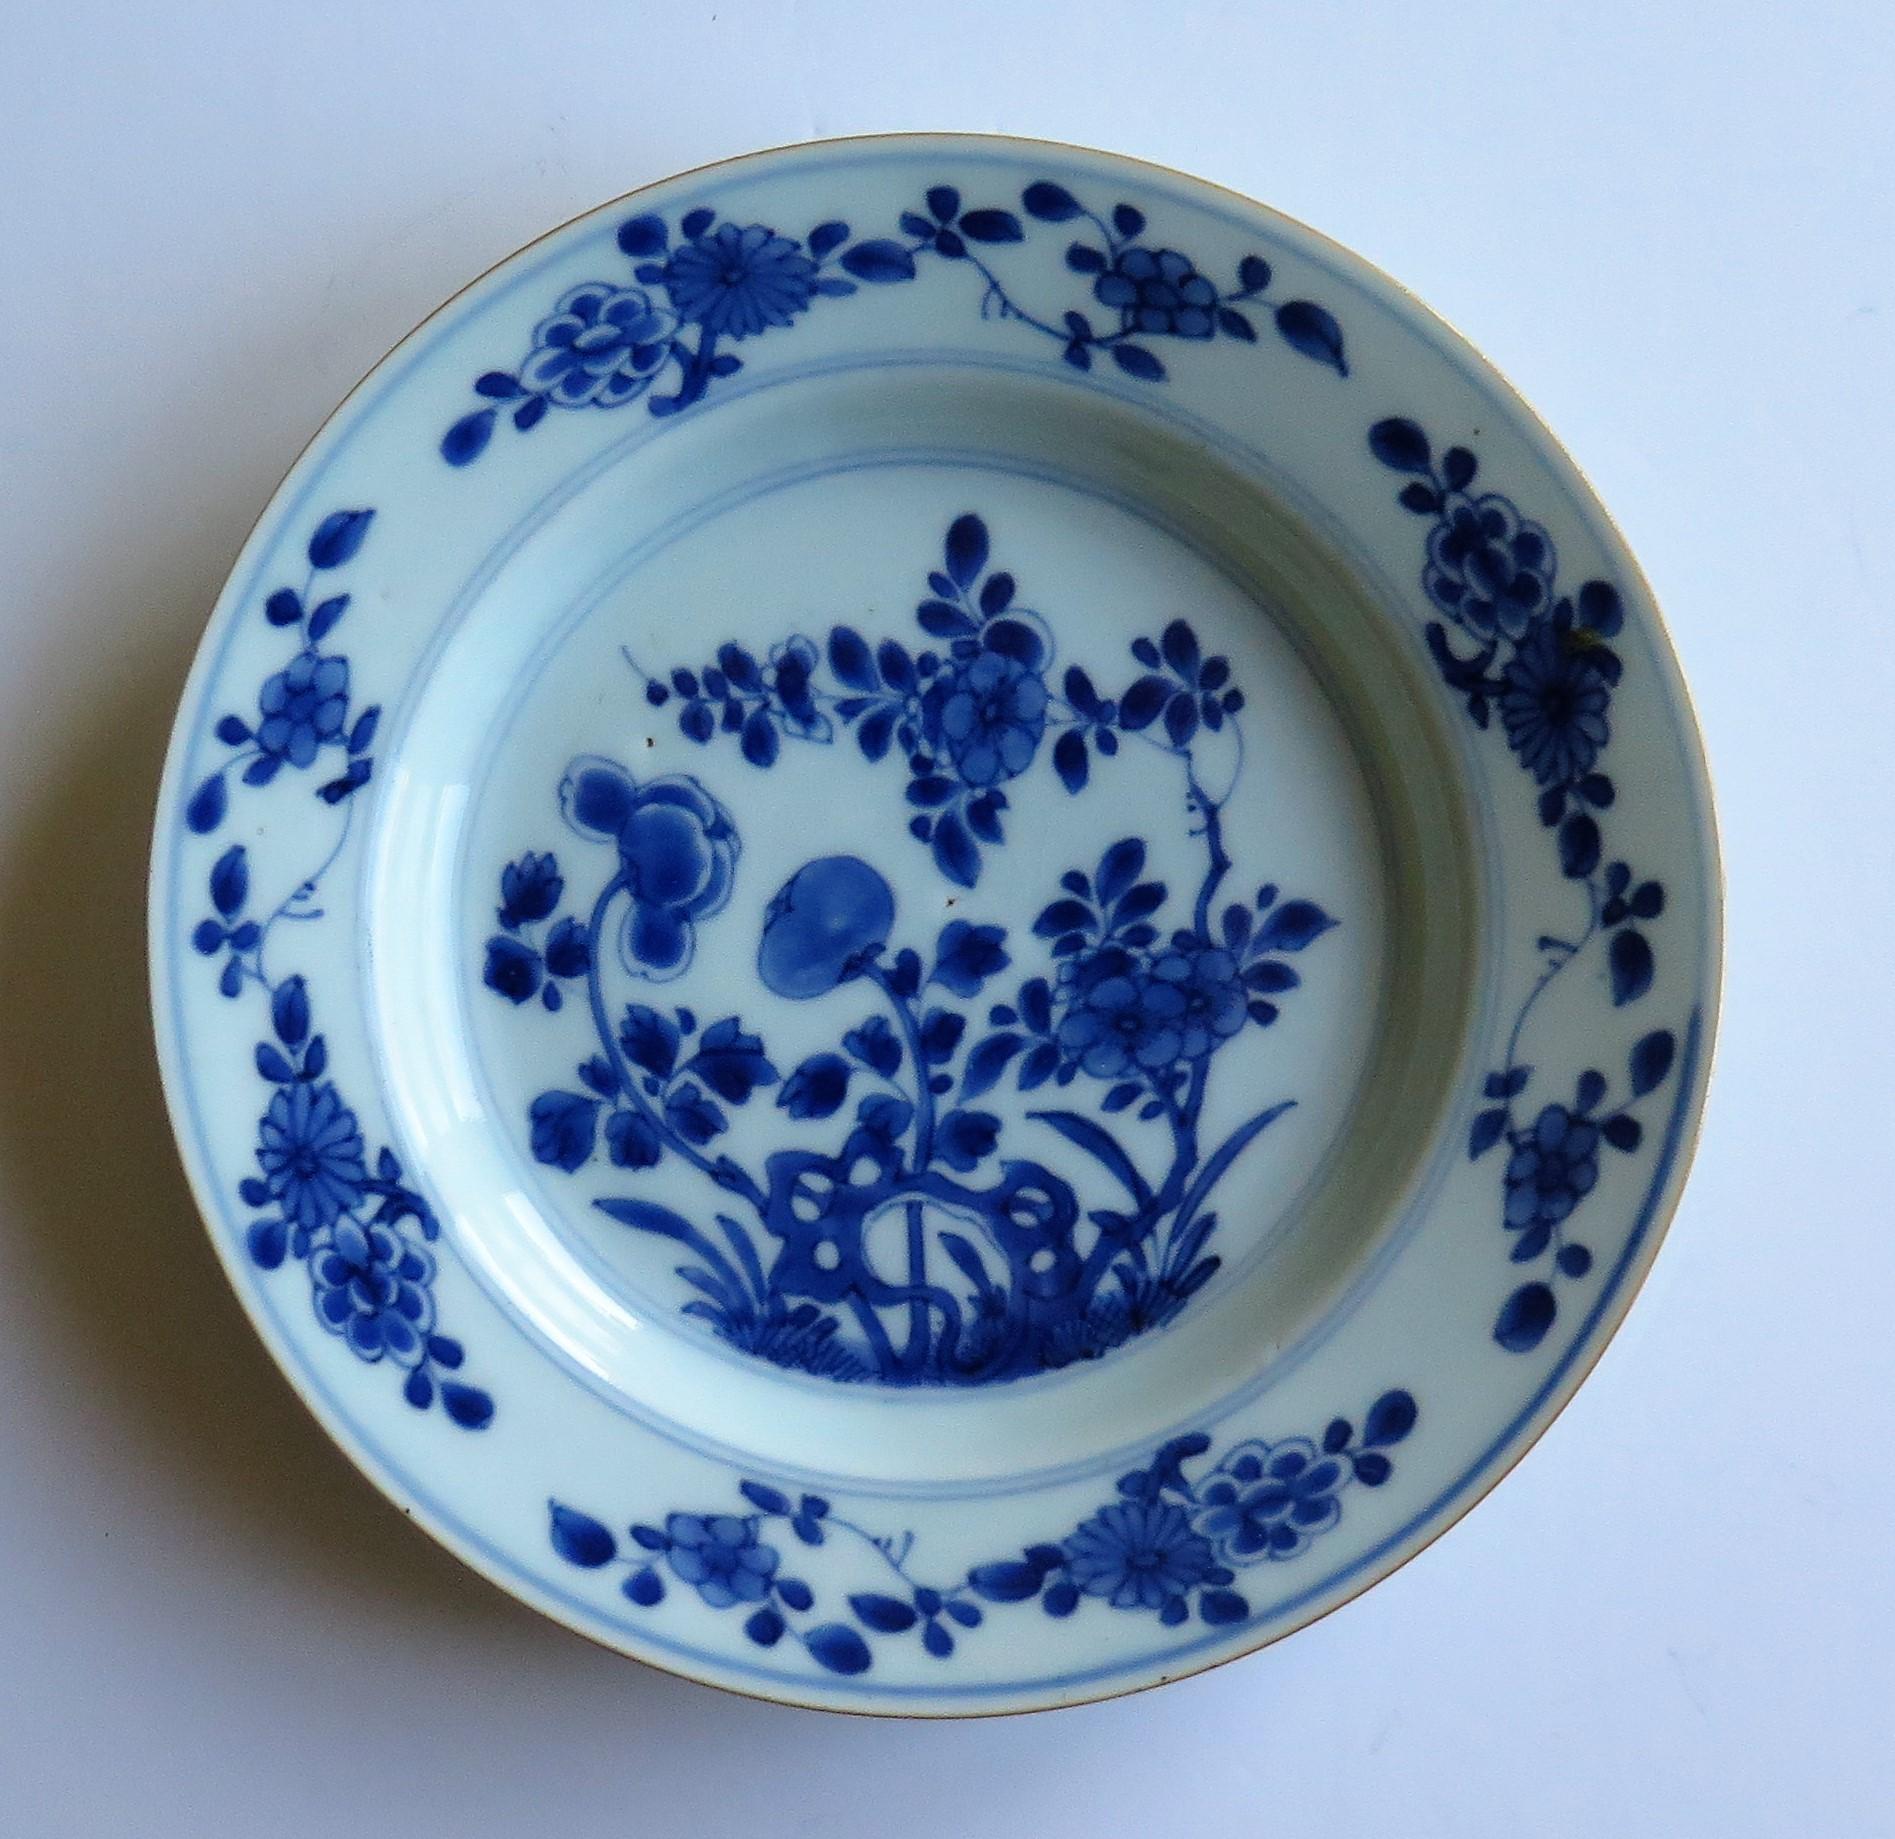 This is a beautiful hand painted Chinese porcelain plate or dish, dating to the first half of the 18th century, circa 1720-1740, Qing dynasty.

The plate is well potted, and has been hand decorated in a lovely free flowing manner in varying shades